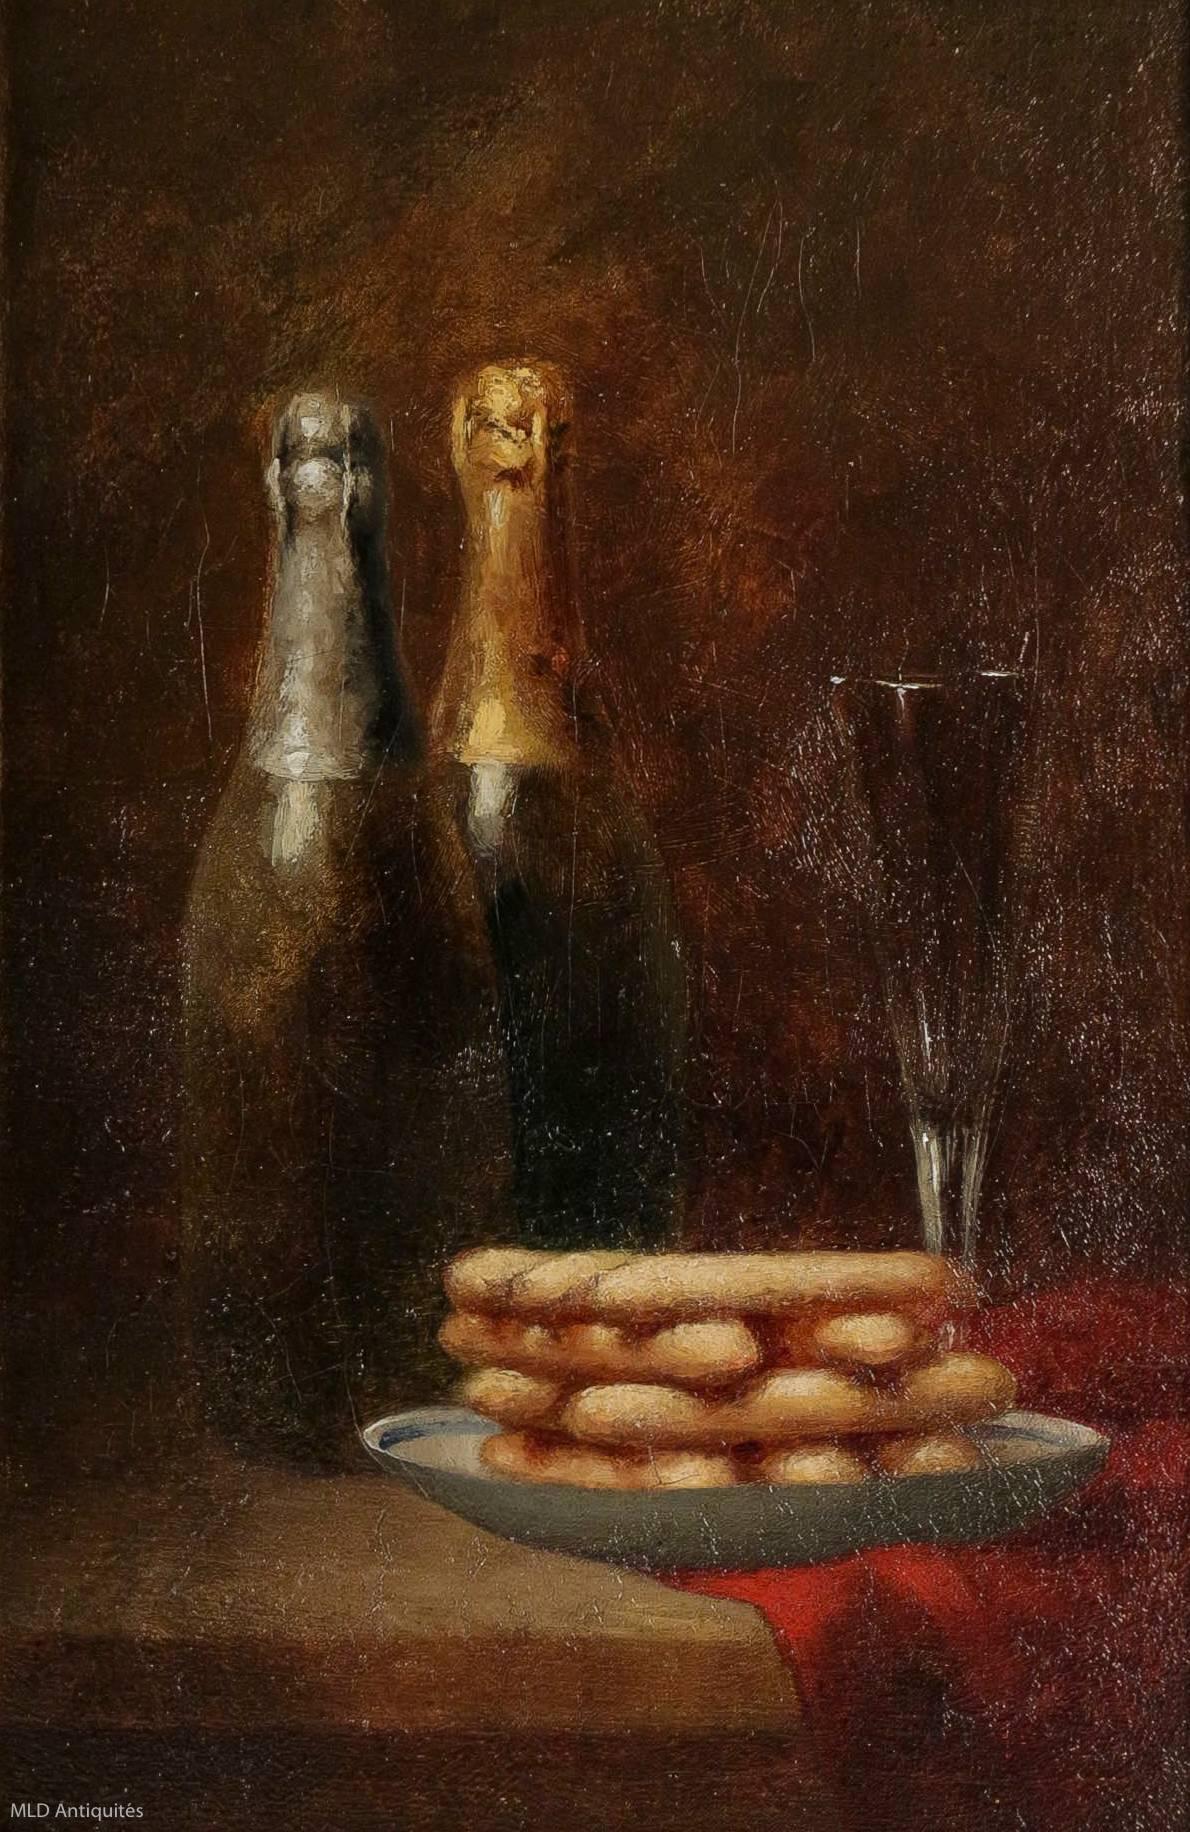 French Sign by Charles Boyer, Oil on Canvas, the Champagne Delights, circa 1880-1890